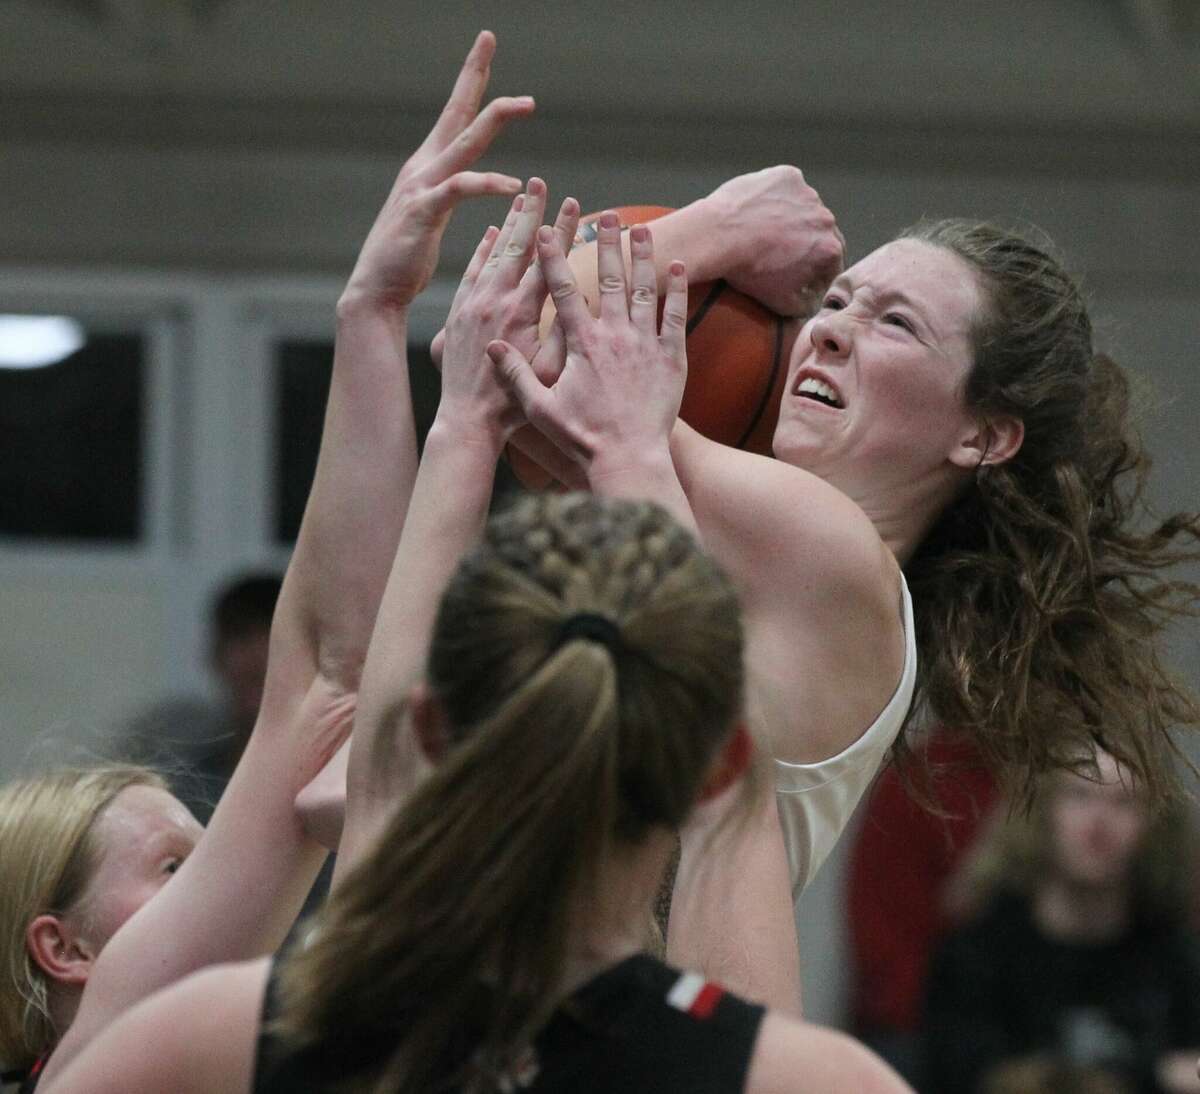 West Central's Bryleigh Fox is fouled as she drives to the basket during a girls' basketball game against Calhoun at Winchester Thursday night.